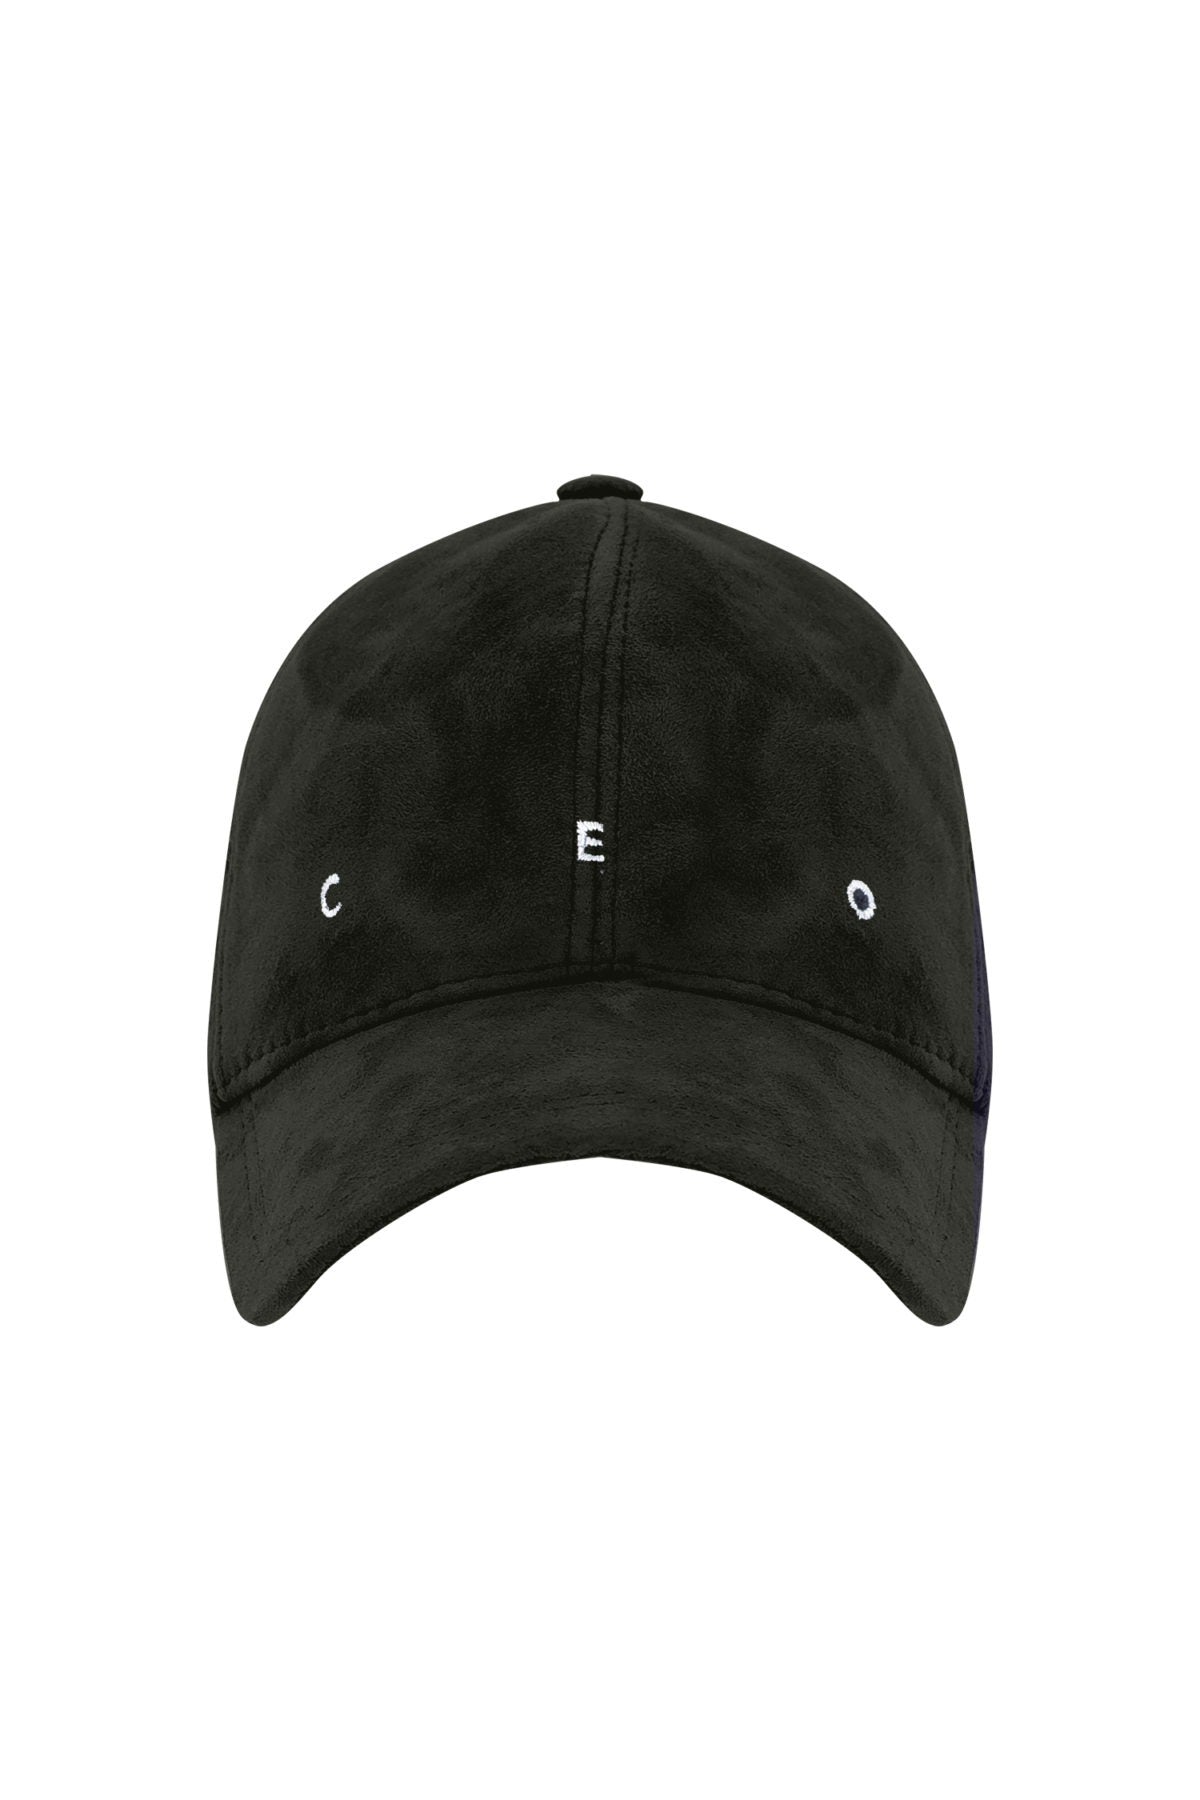 Ceo - Duck Green